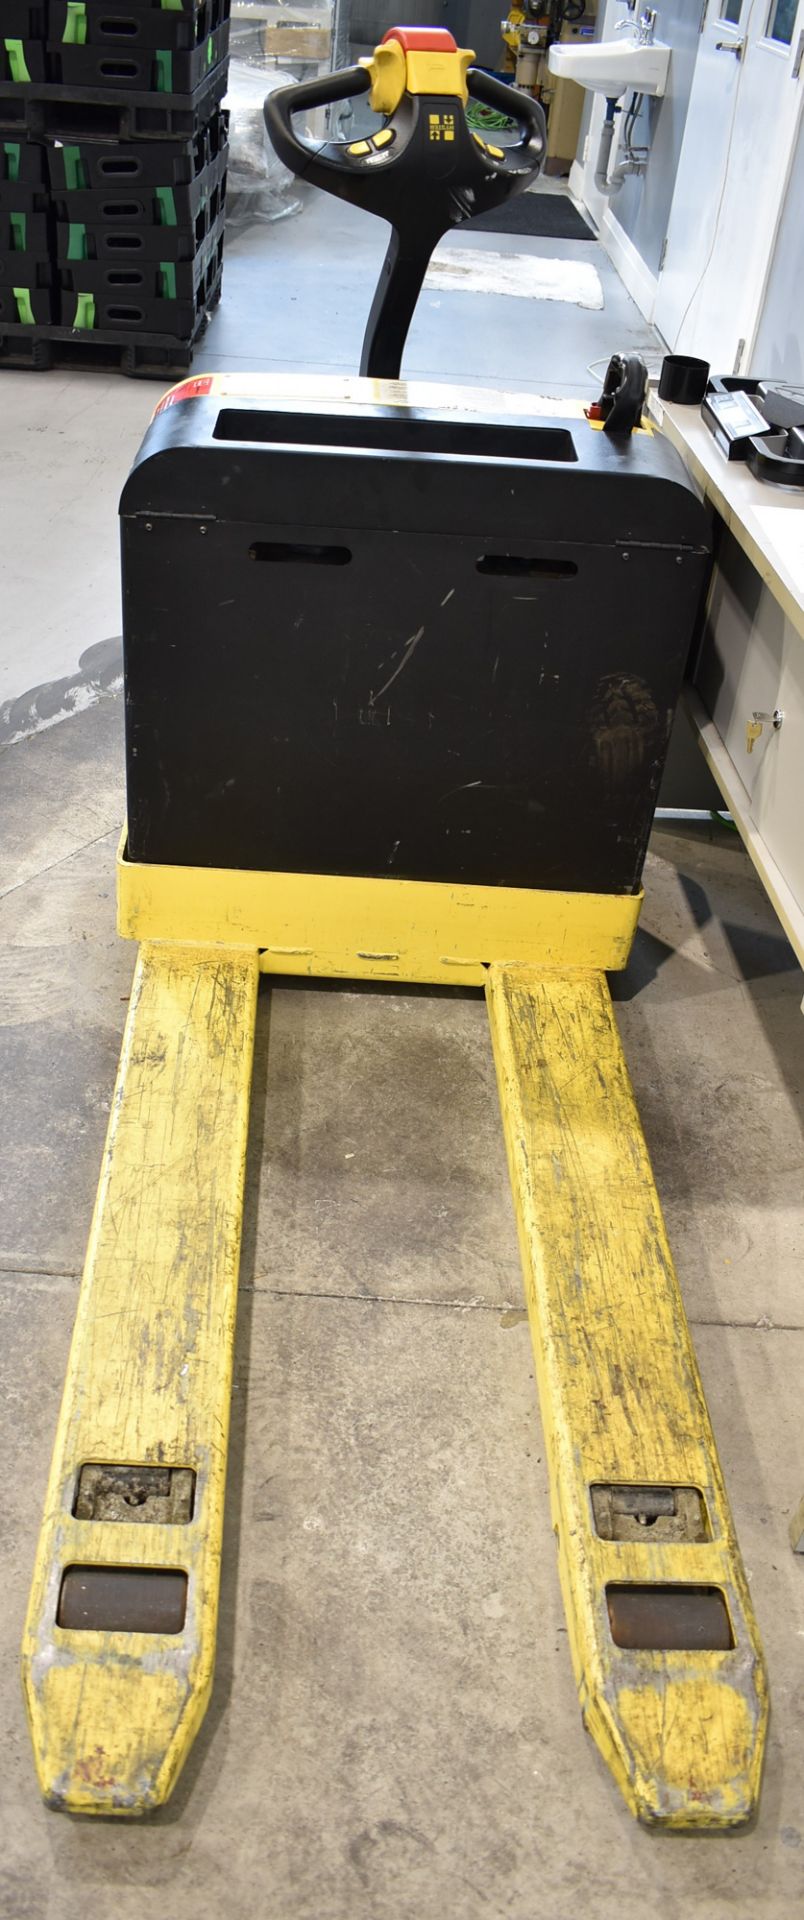 HYSTER W40Z 24V PALLET TRUCK WITH 4,000 LB MAX CAPACITY, NEW BATTERIES - INSTALLED AUG. 2022 - Image 2 of 4